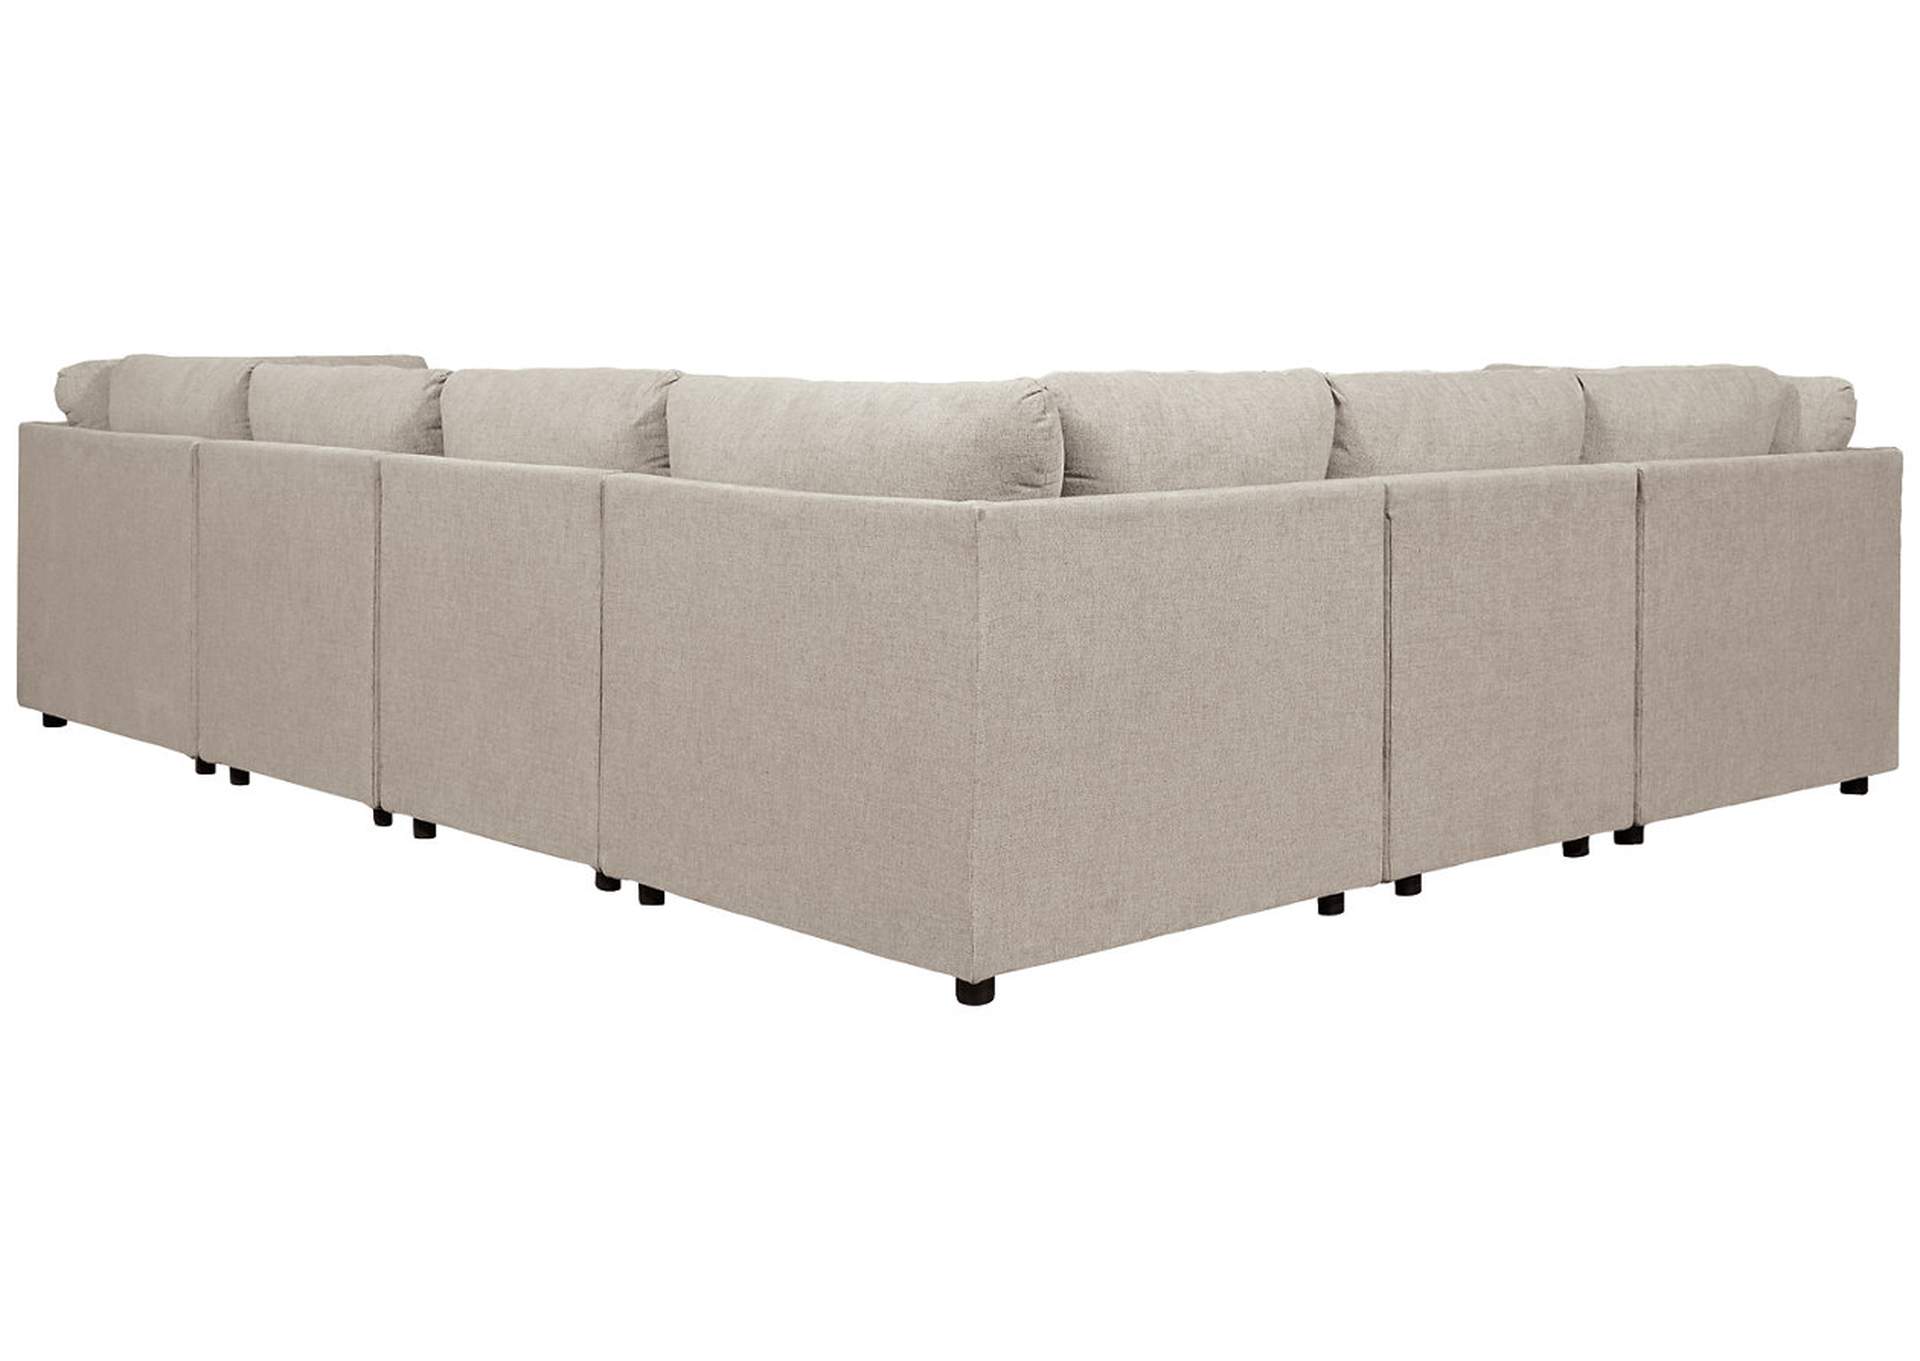 Kellway 6-Piece Sectional with Ottoman,Signature Design By Ashley